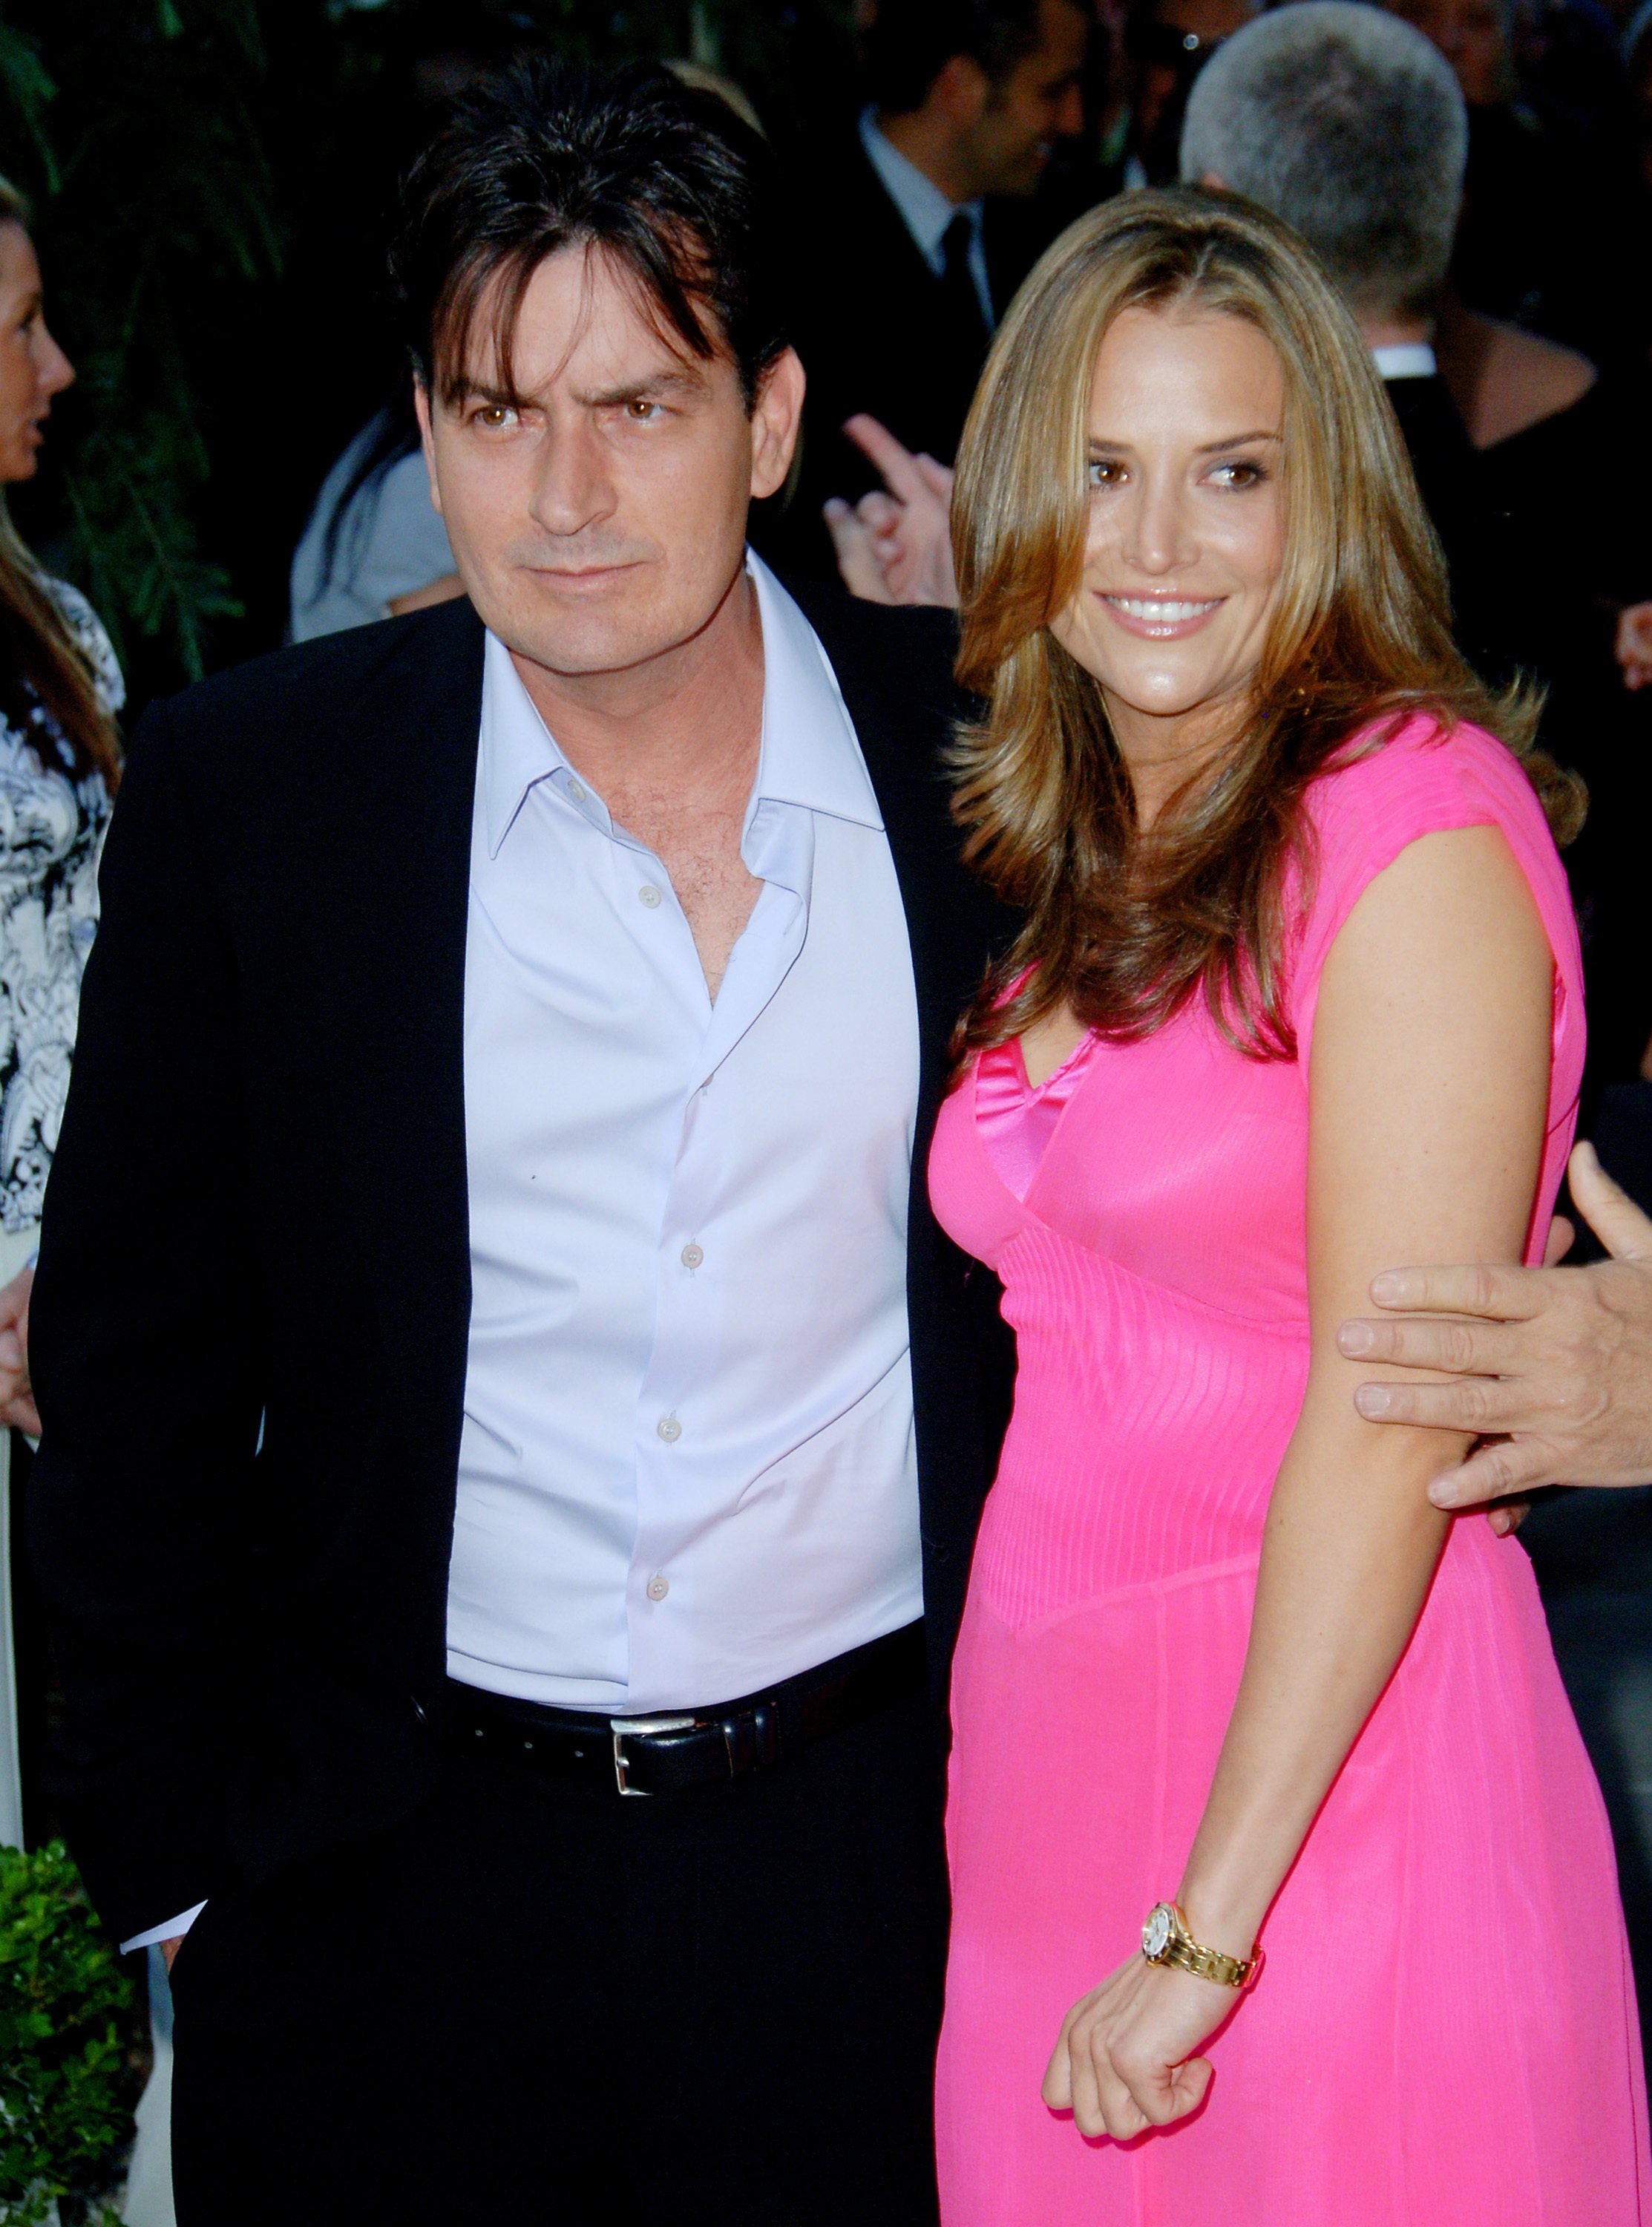 Hollywood star Charlie Sheen and Brooke Mueller were married for two years before calling it quits. Now there are fresh revelations that she has a fling with Friends star Matthew Perry. Photo: Getty Images